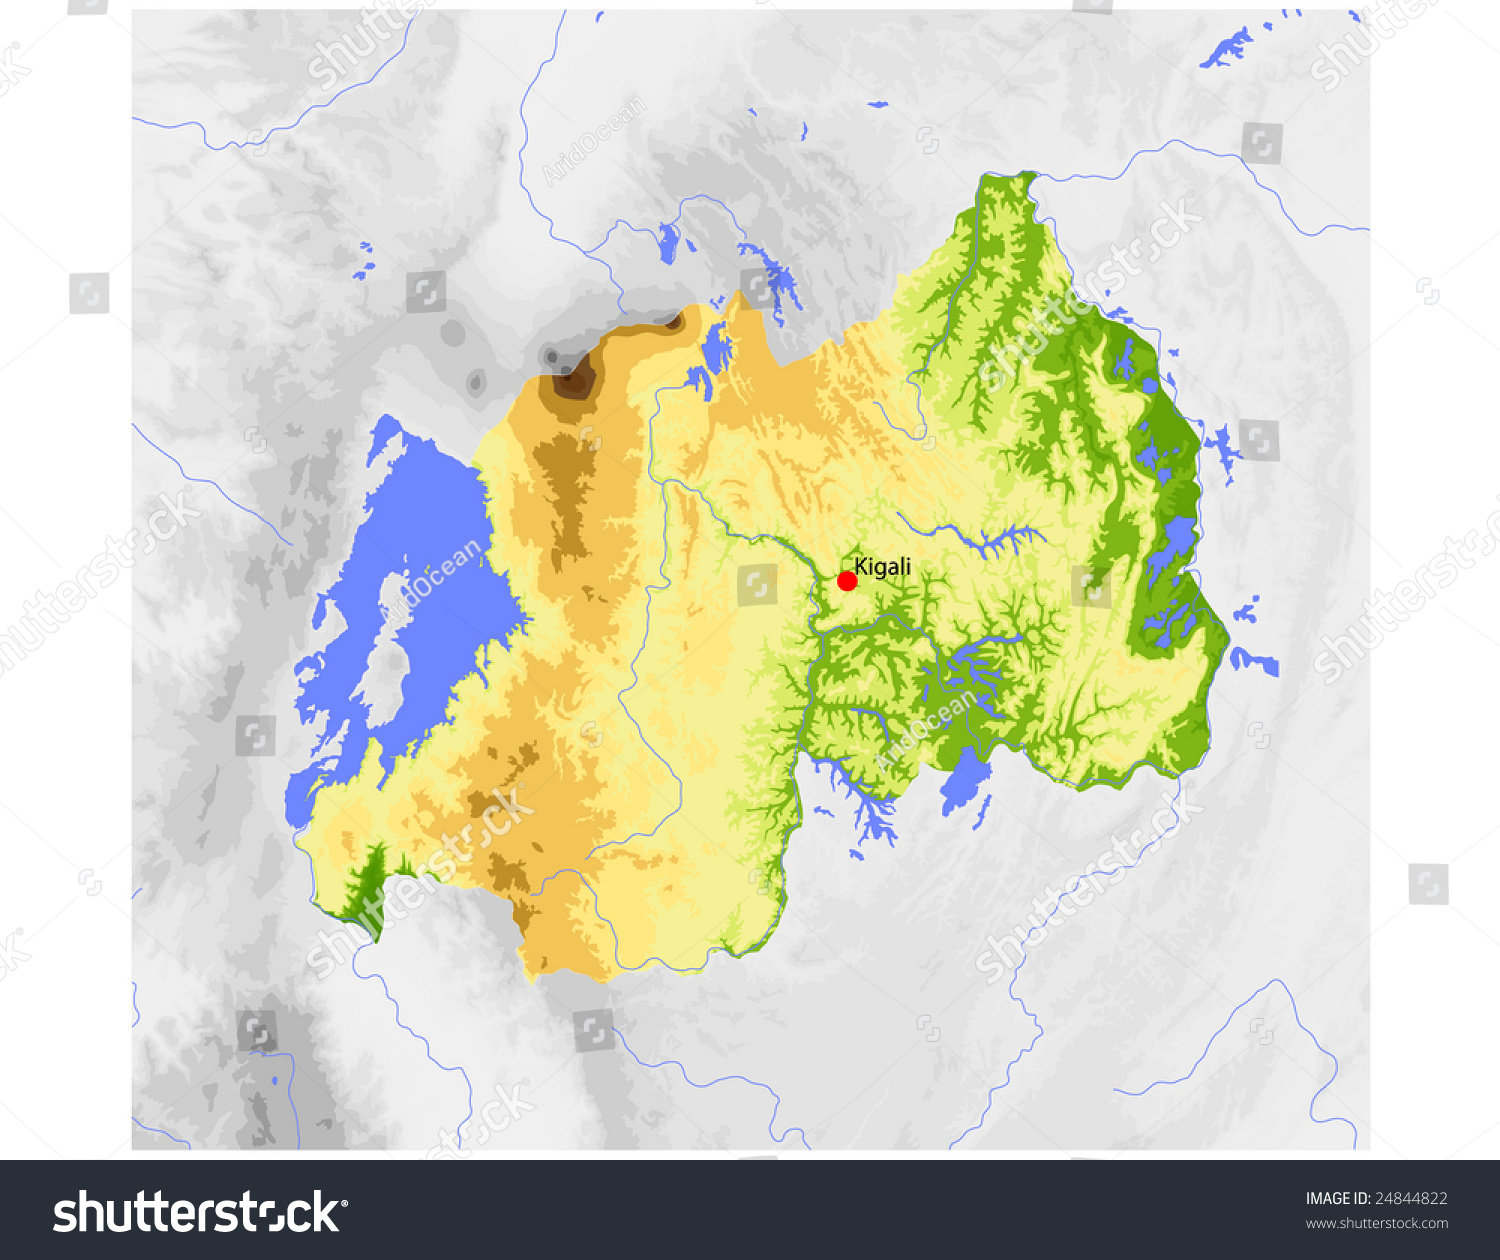 Rwanda Physical Vector Map Colored According 2464 | Hot Sex Picture